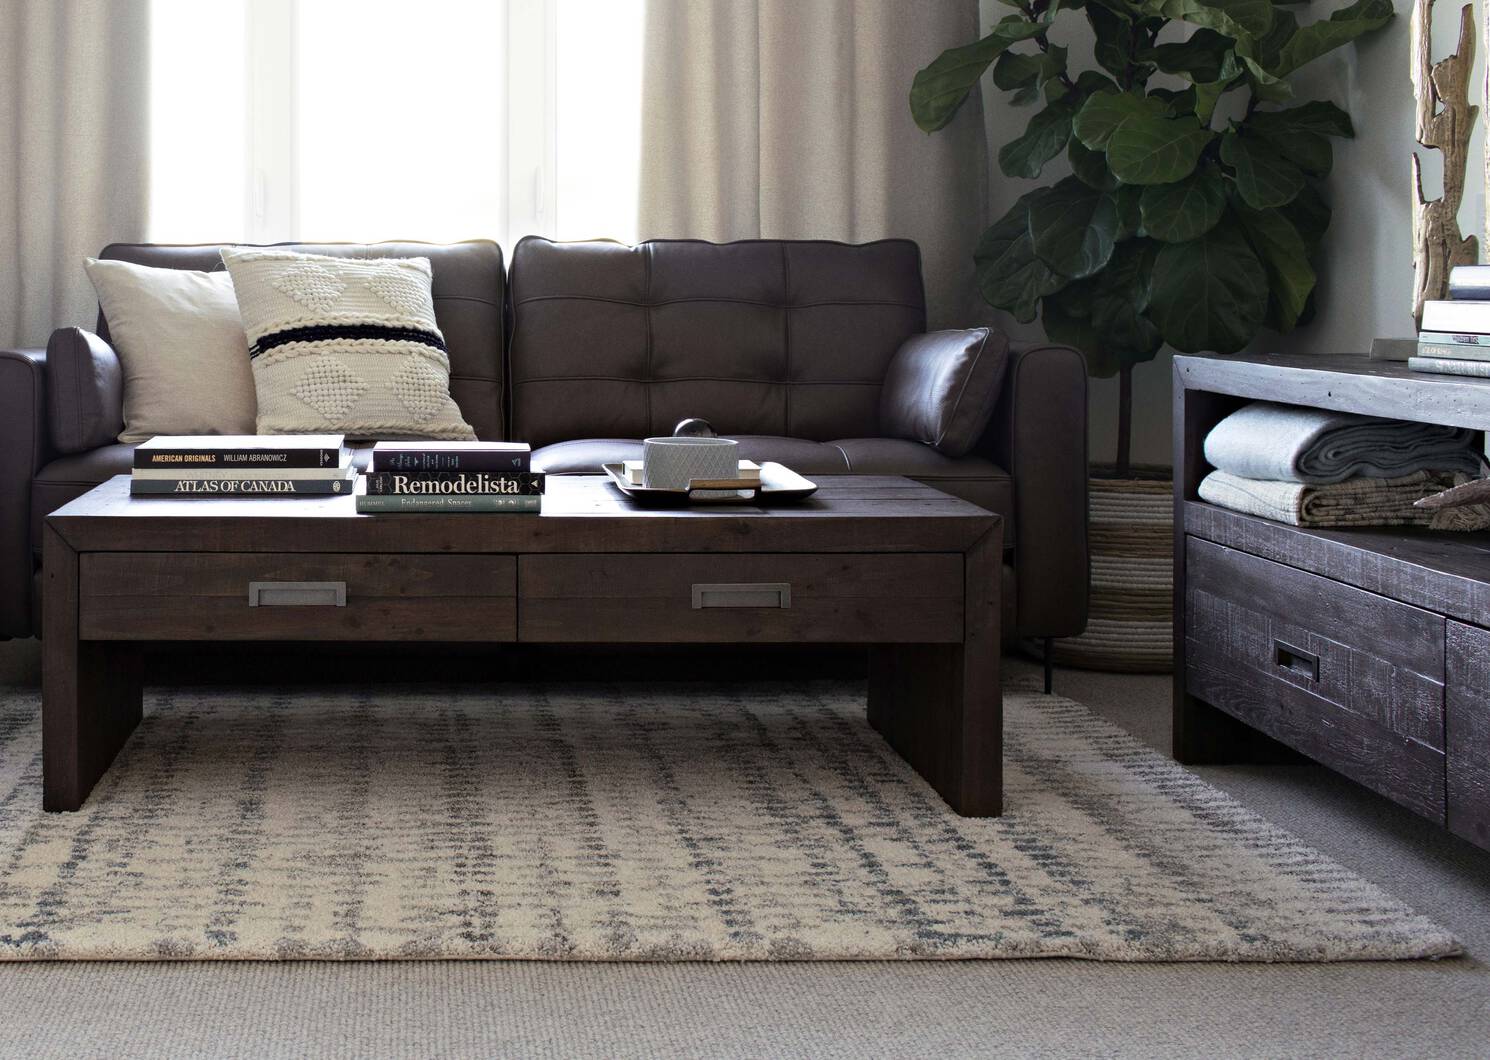 Stansfield Coffee Table -Waco Umber